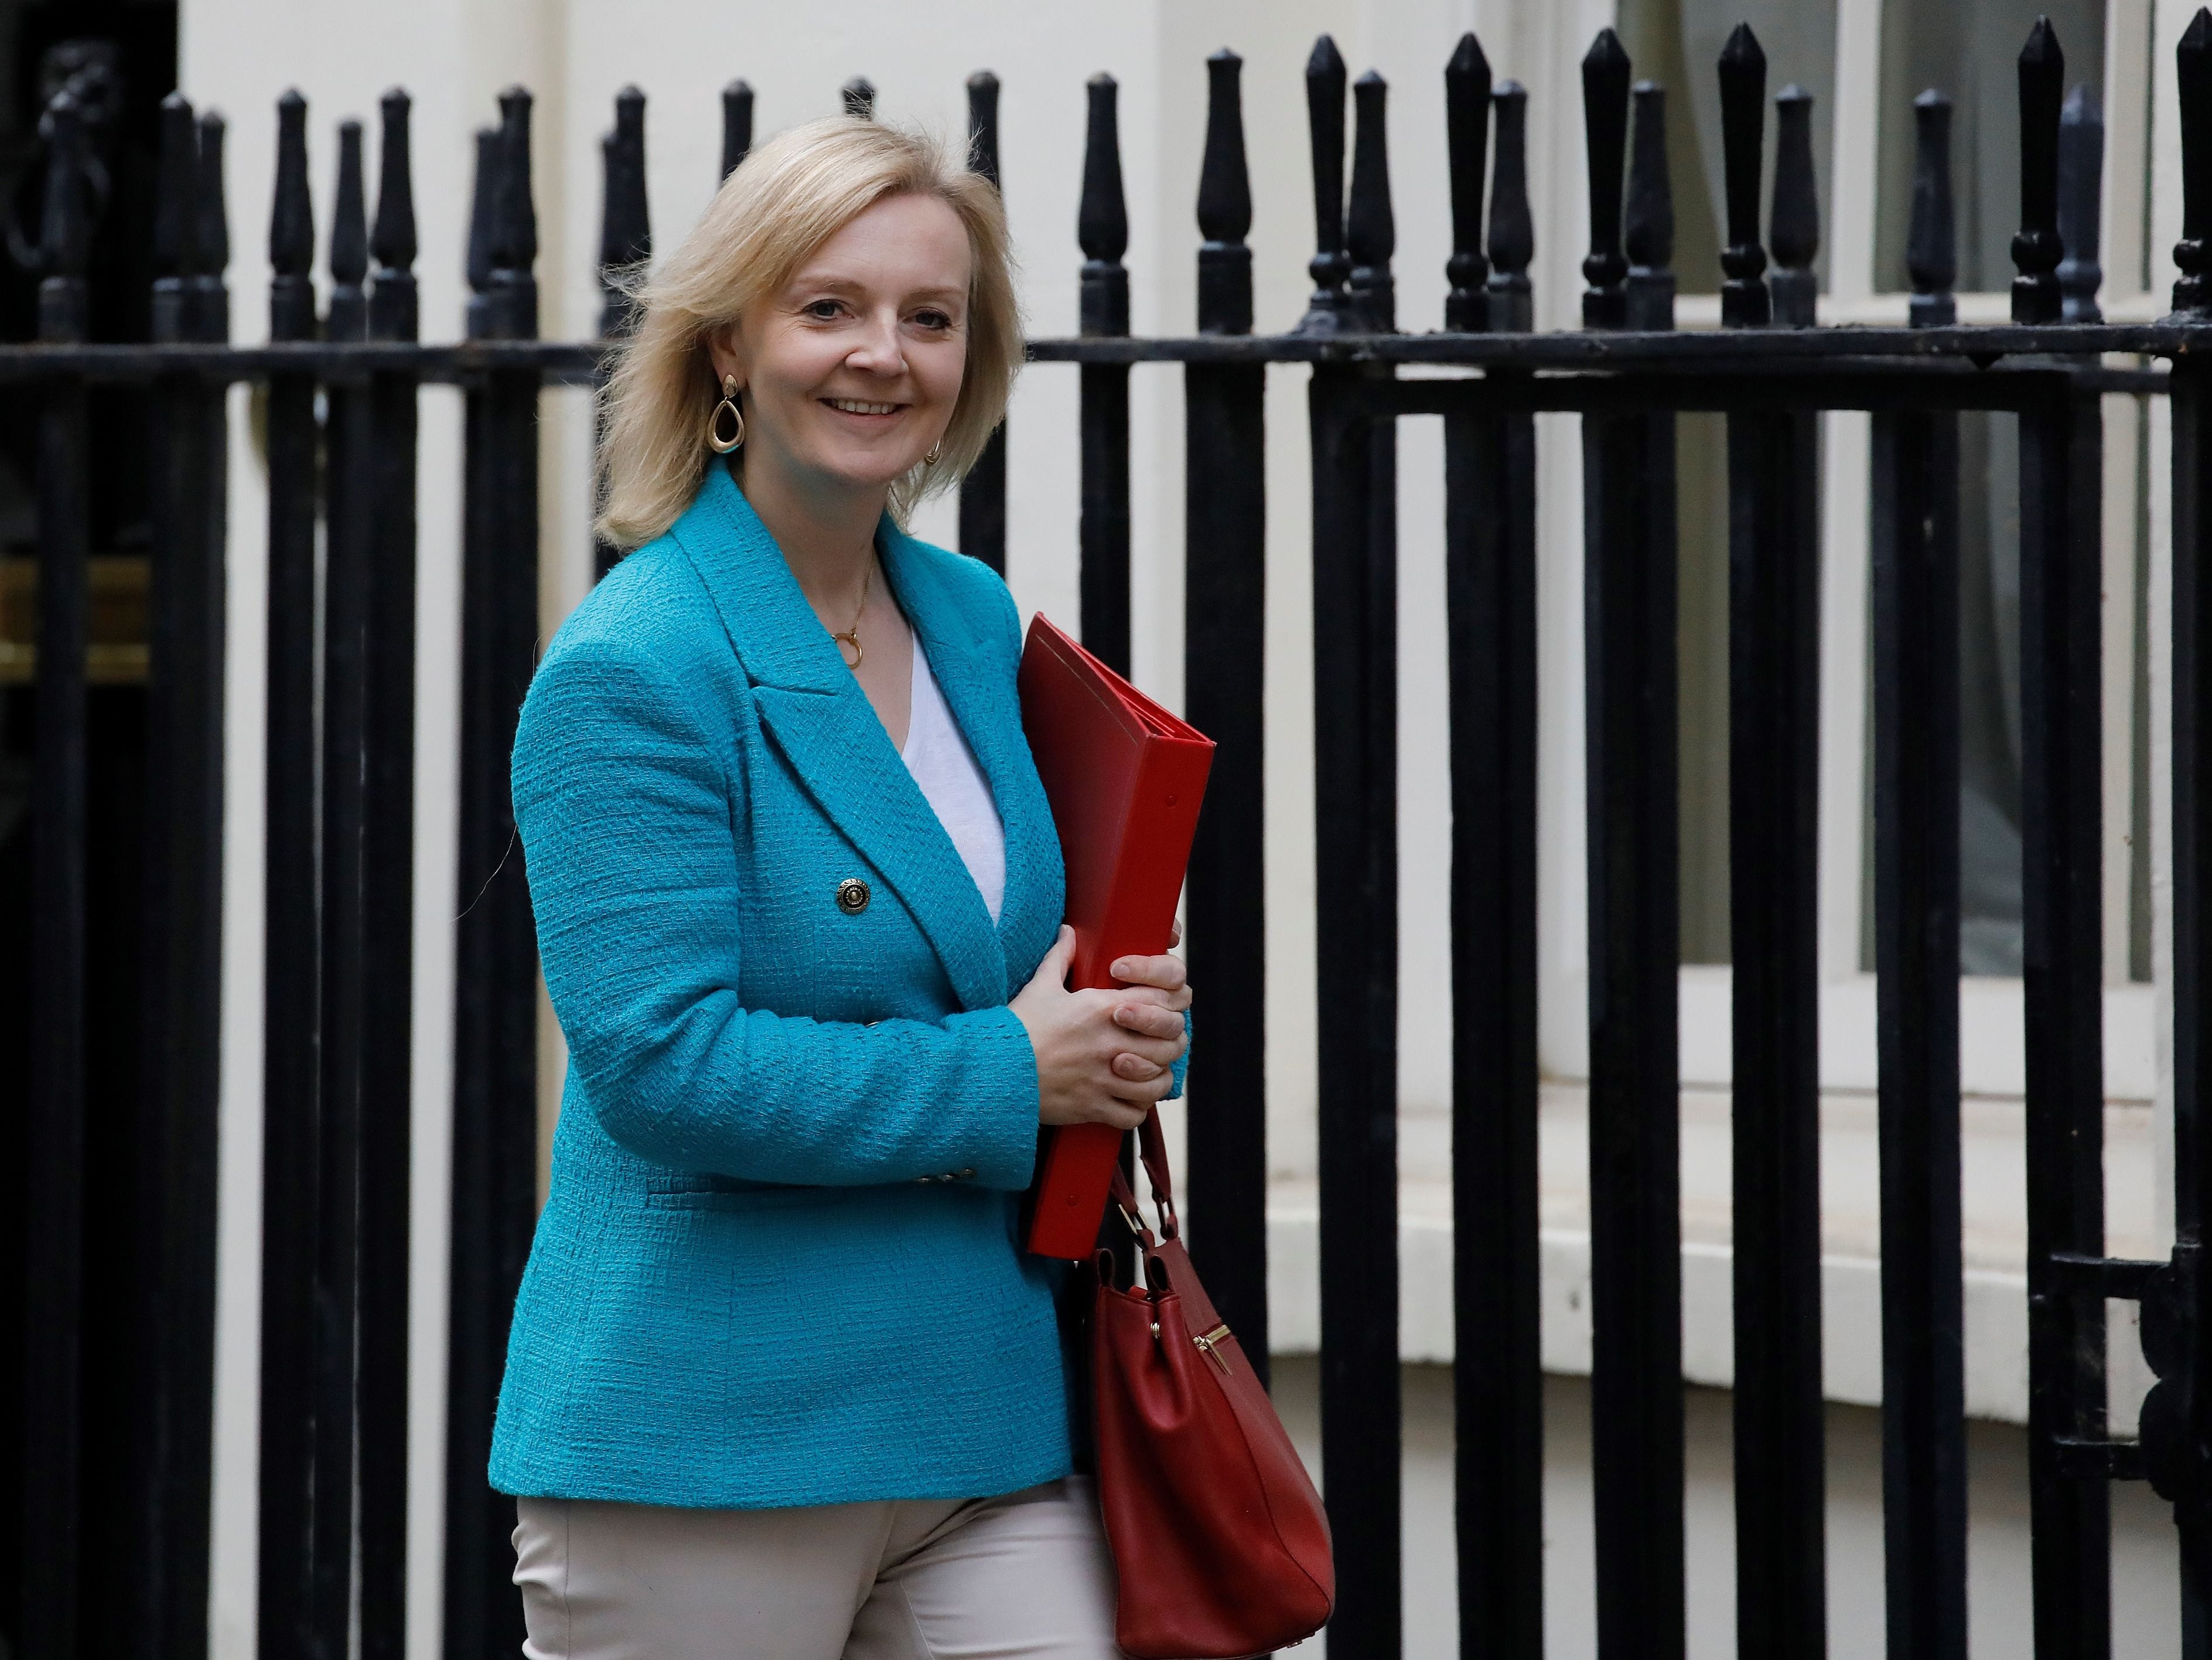 Women and Equalities Minister Liz Truss